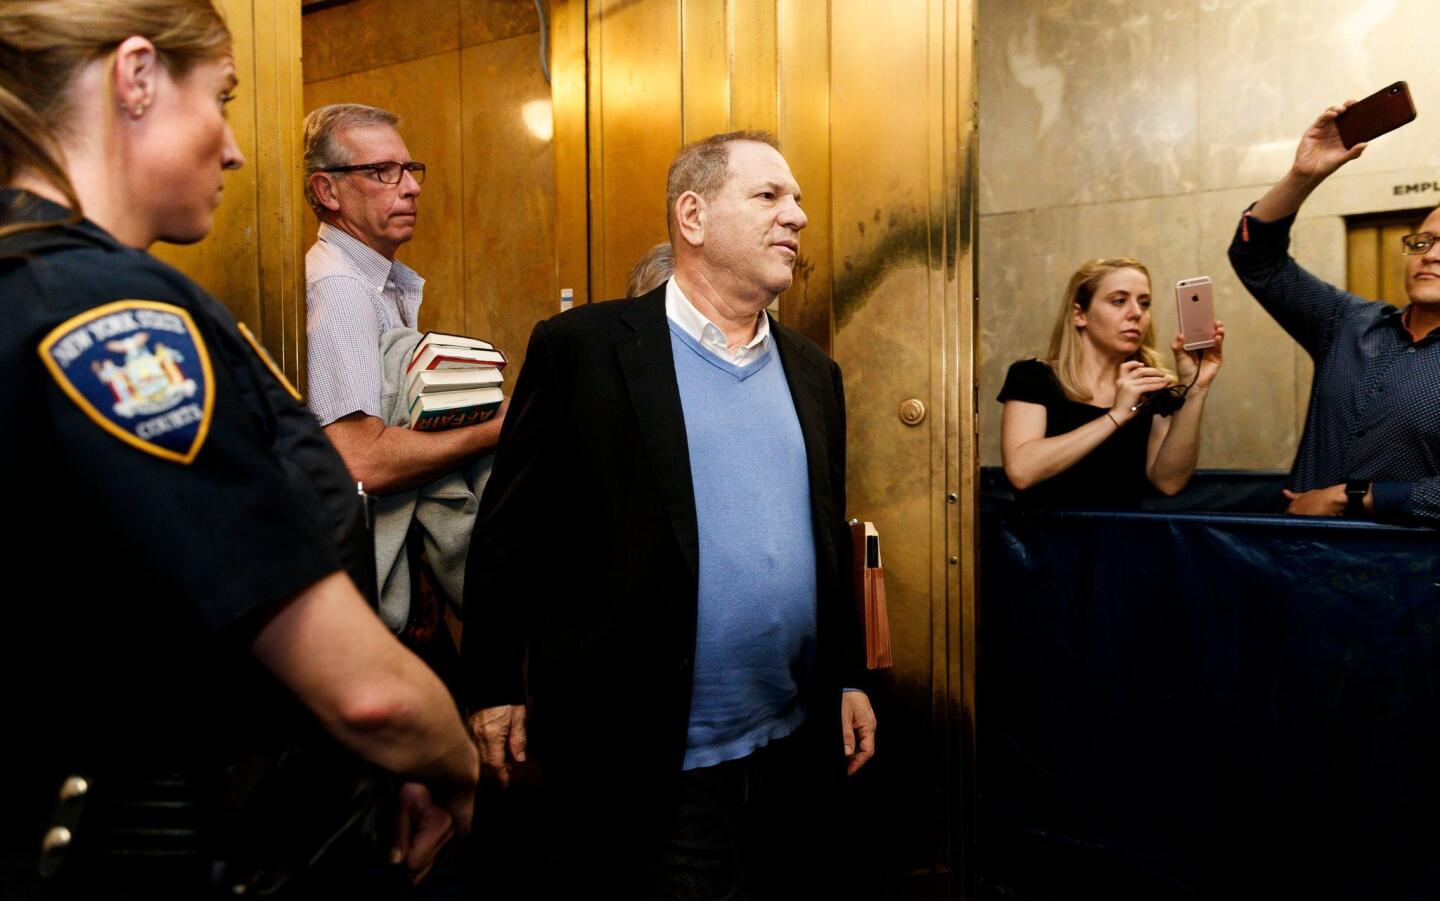 Harvey Weinstein leaves court after being charged with multiple sex crimes in New York.